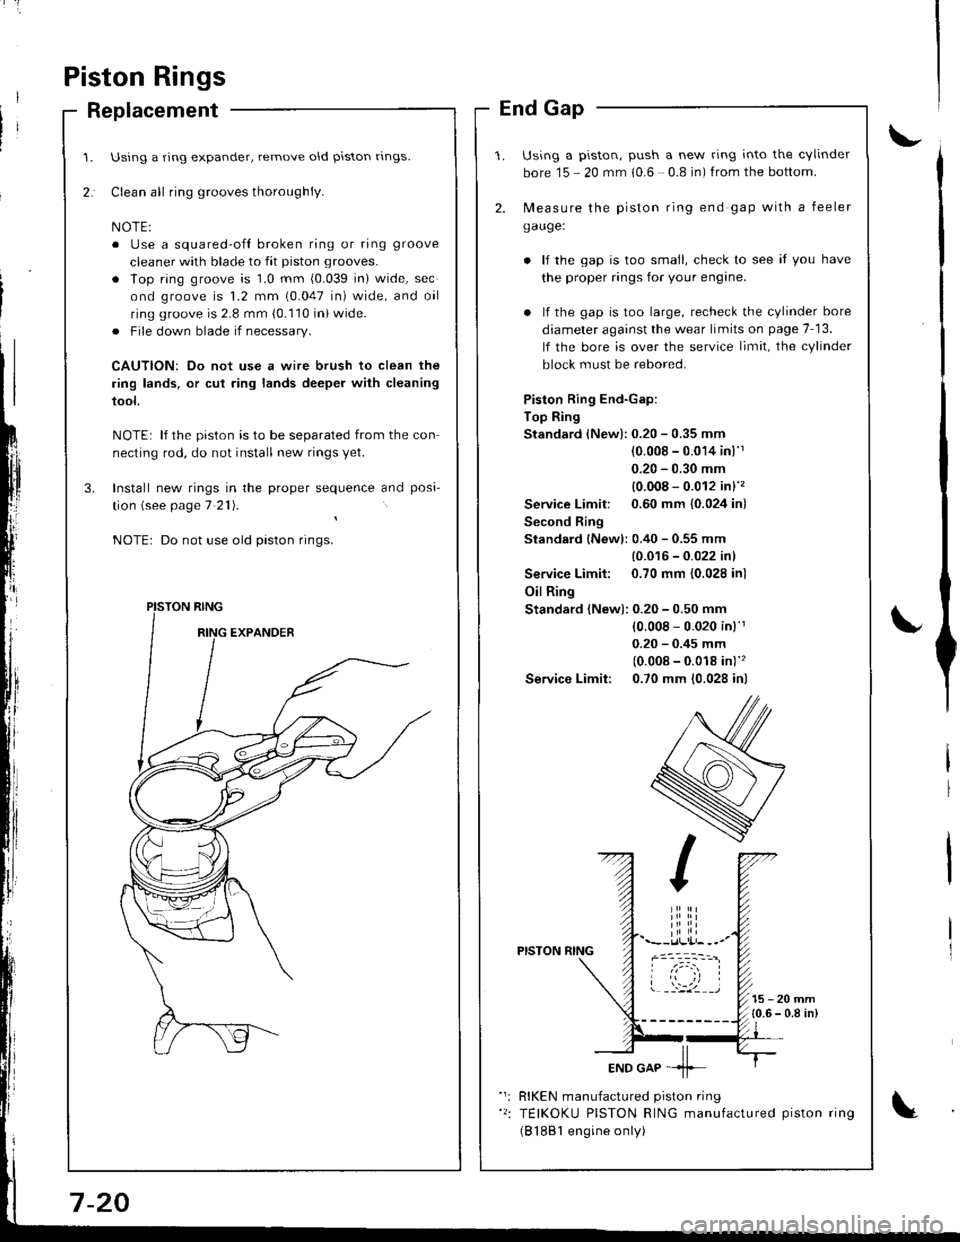 HONDA INTEGRA 1998 4.G User Guide Piston Rings
Replacement
Using a ring expander, remove old piston rlngs.
Clean all ring grooves thoroughly.
o Use a squared-ofl broken ring or ring groove
cleaner with blade to fit piston grooves.
. l